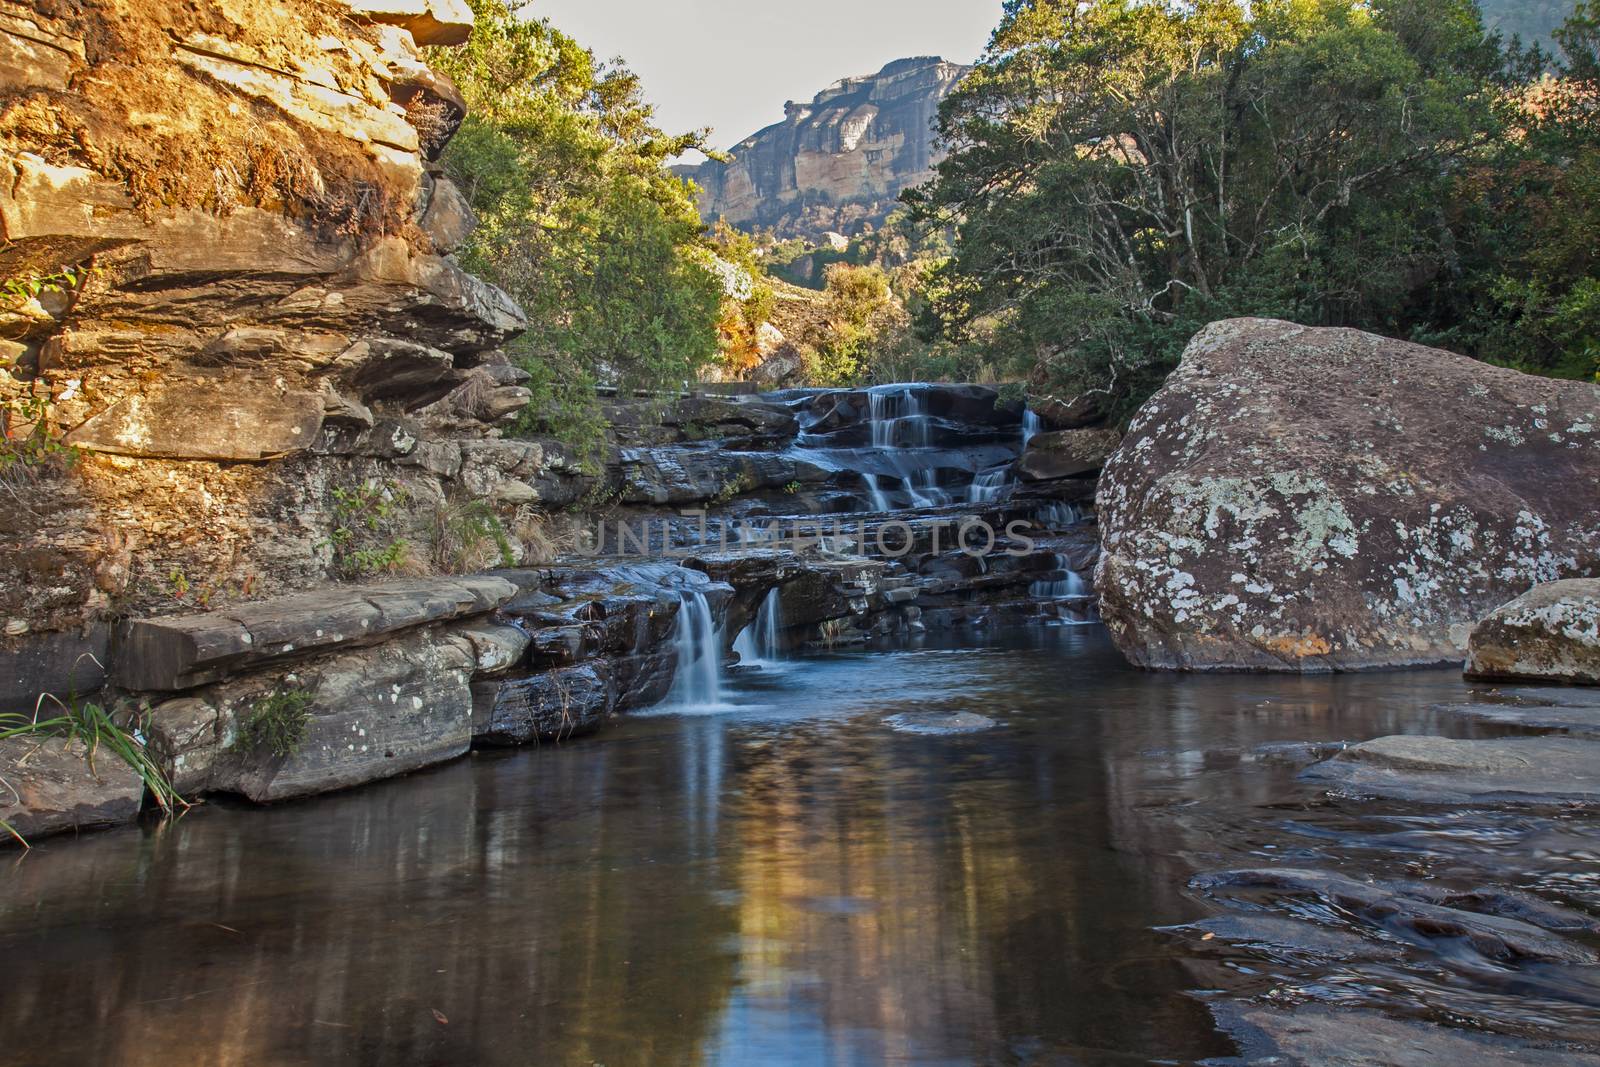 The Cascades is a series of small waterfalls in the Mahai River in Royal Natal National Park. Drakensberg. South Africa